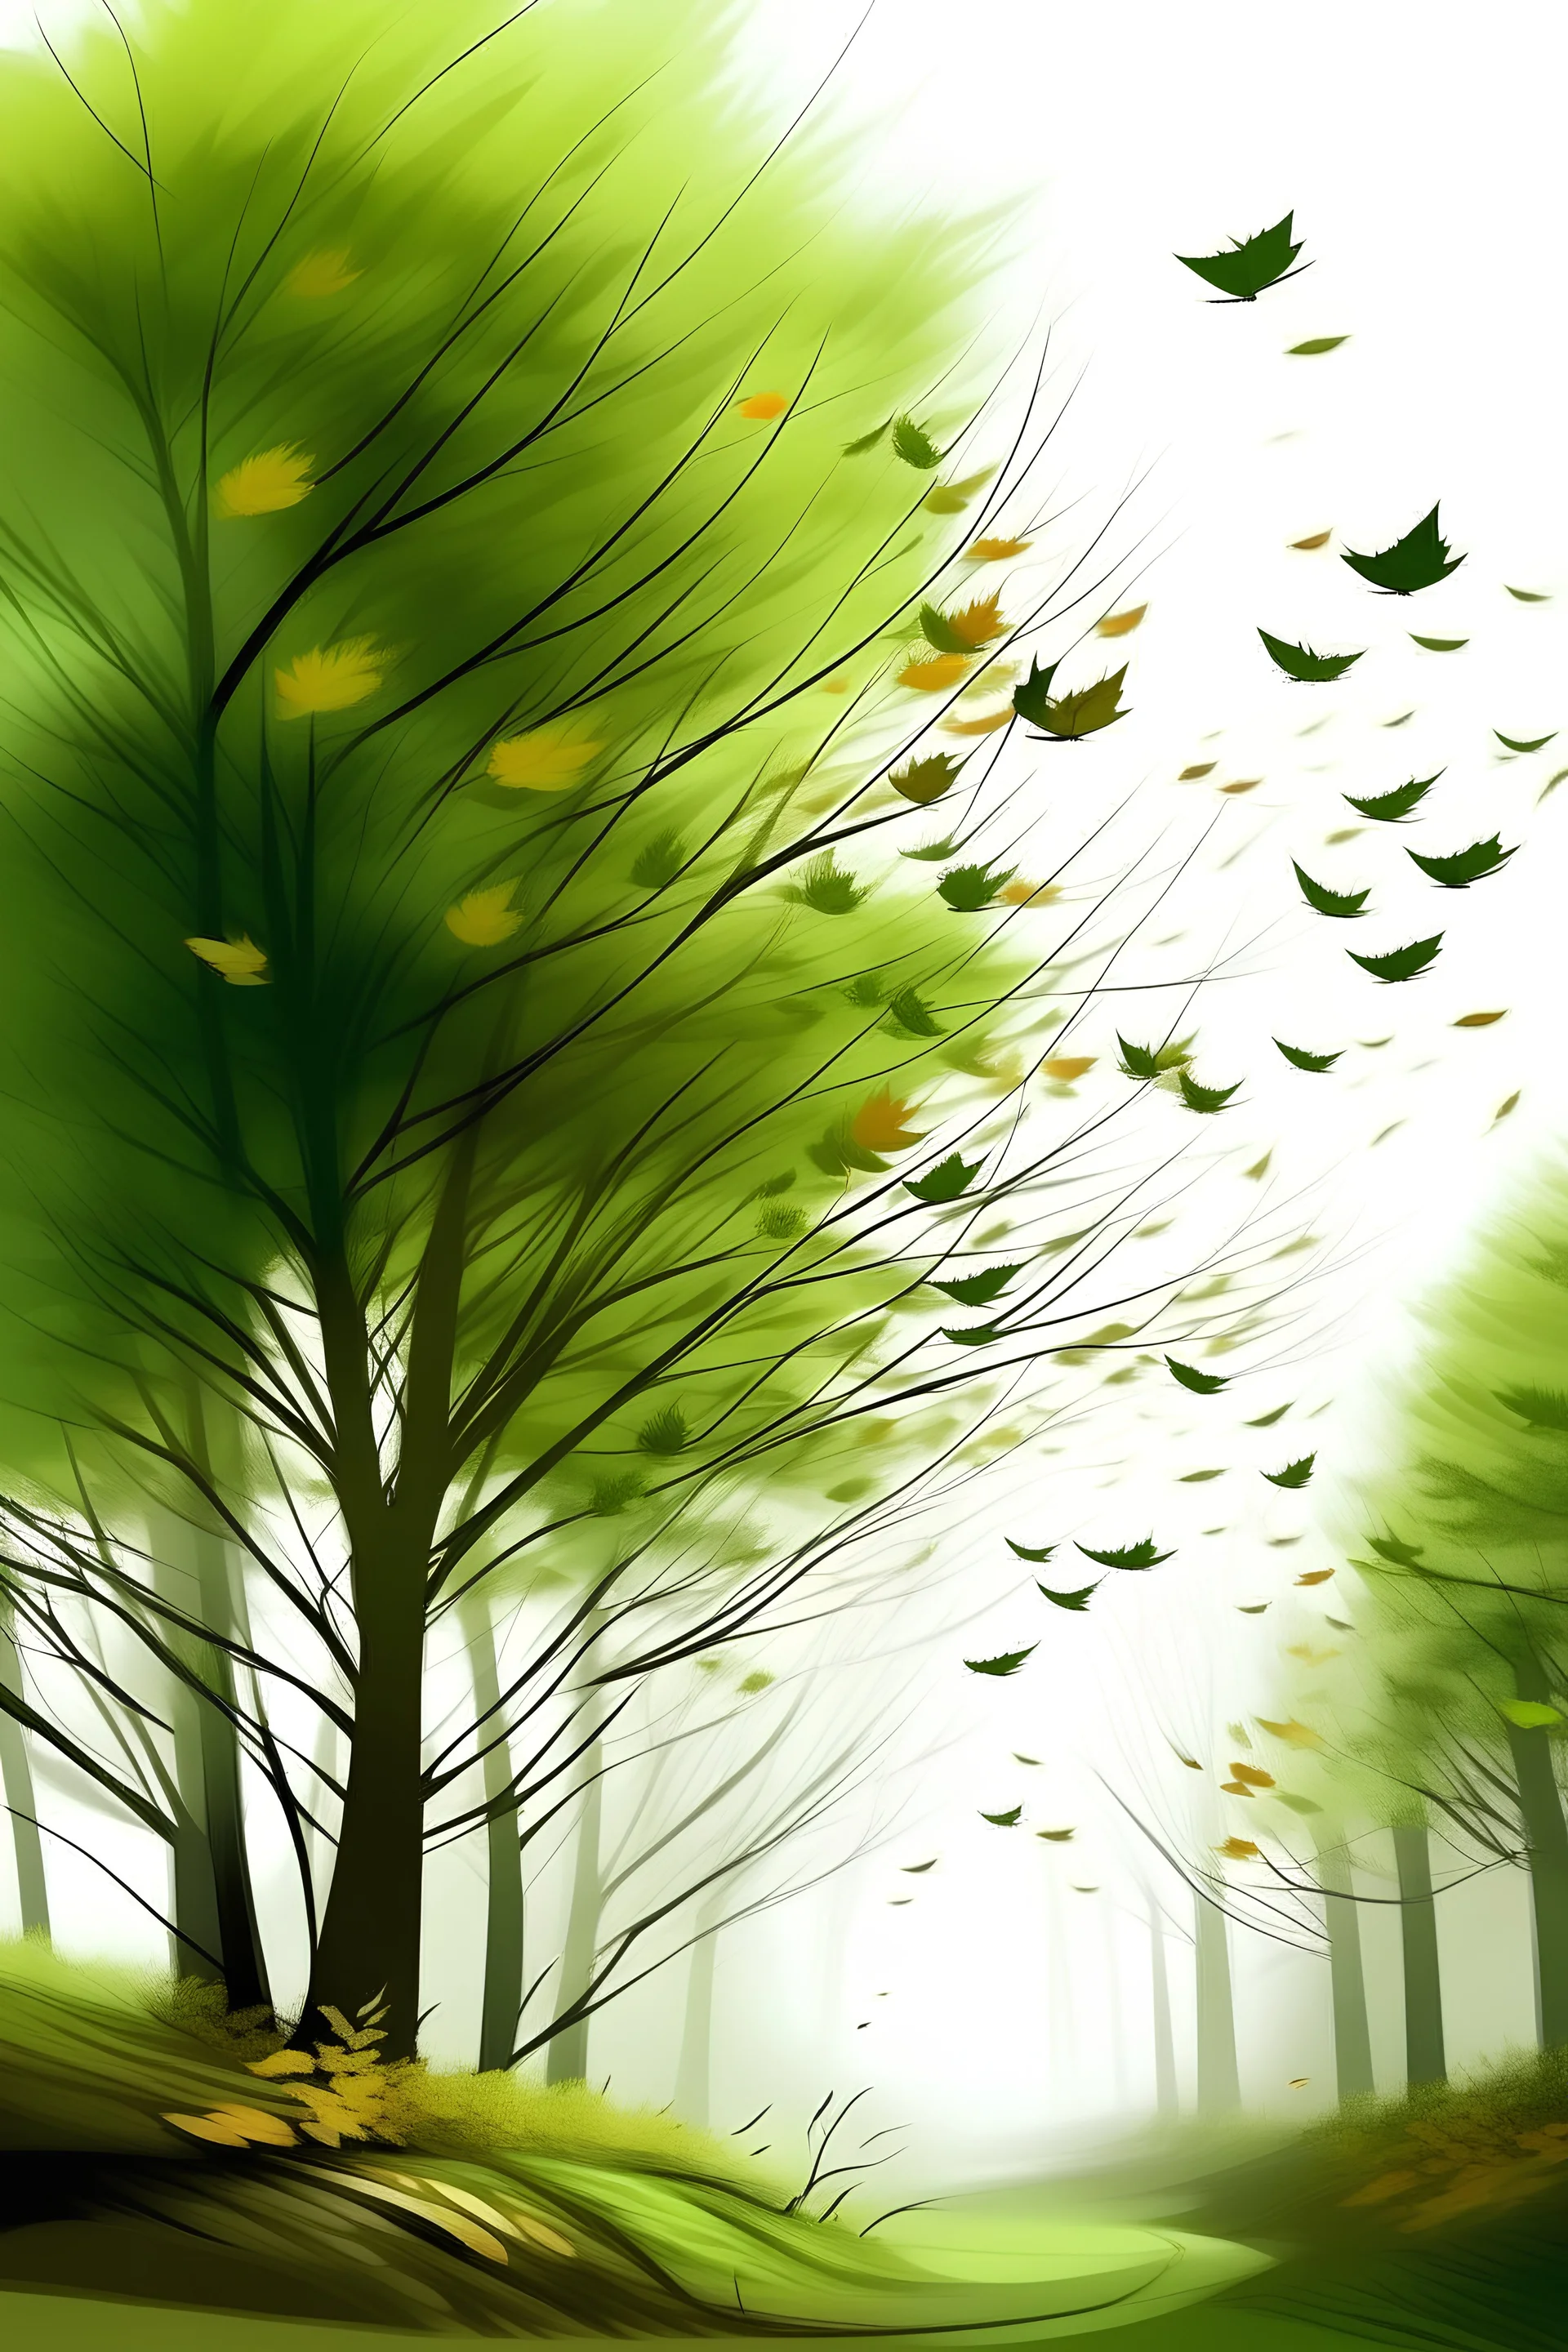 draw a wind flipping the leaves of the forest trees